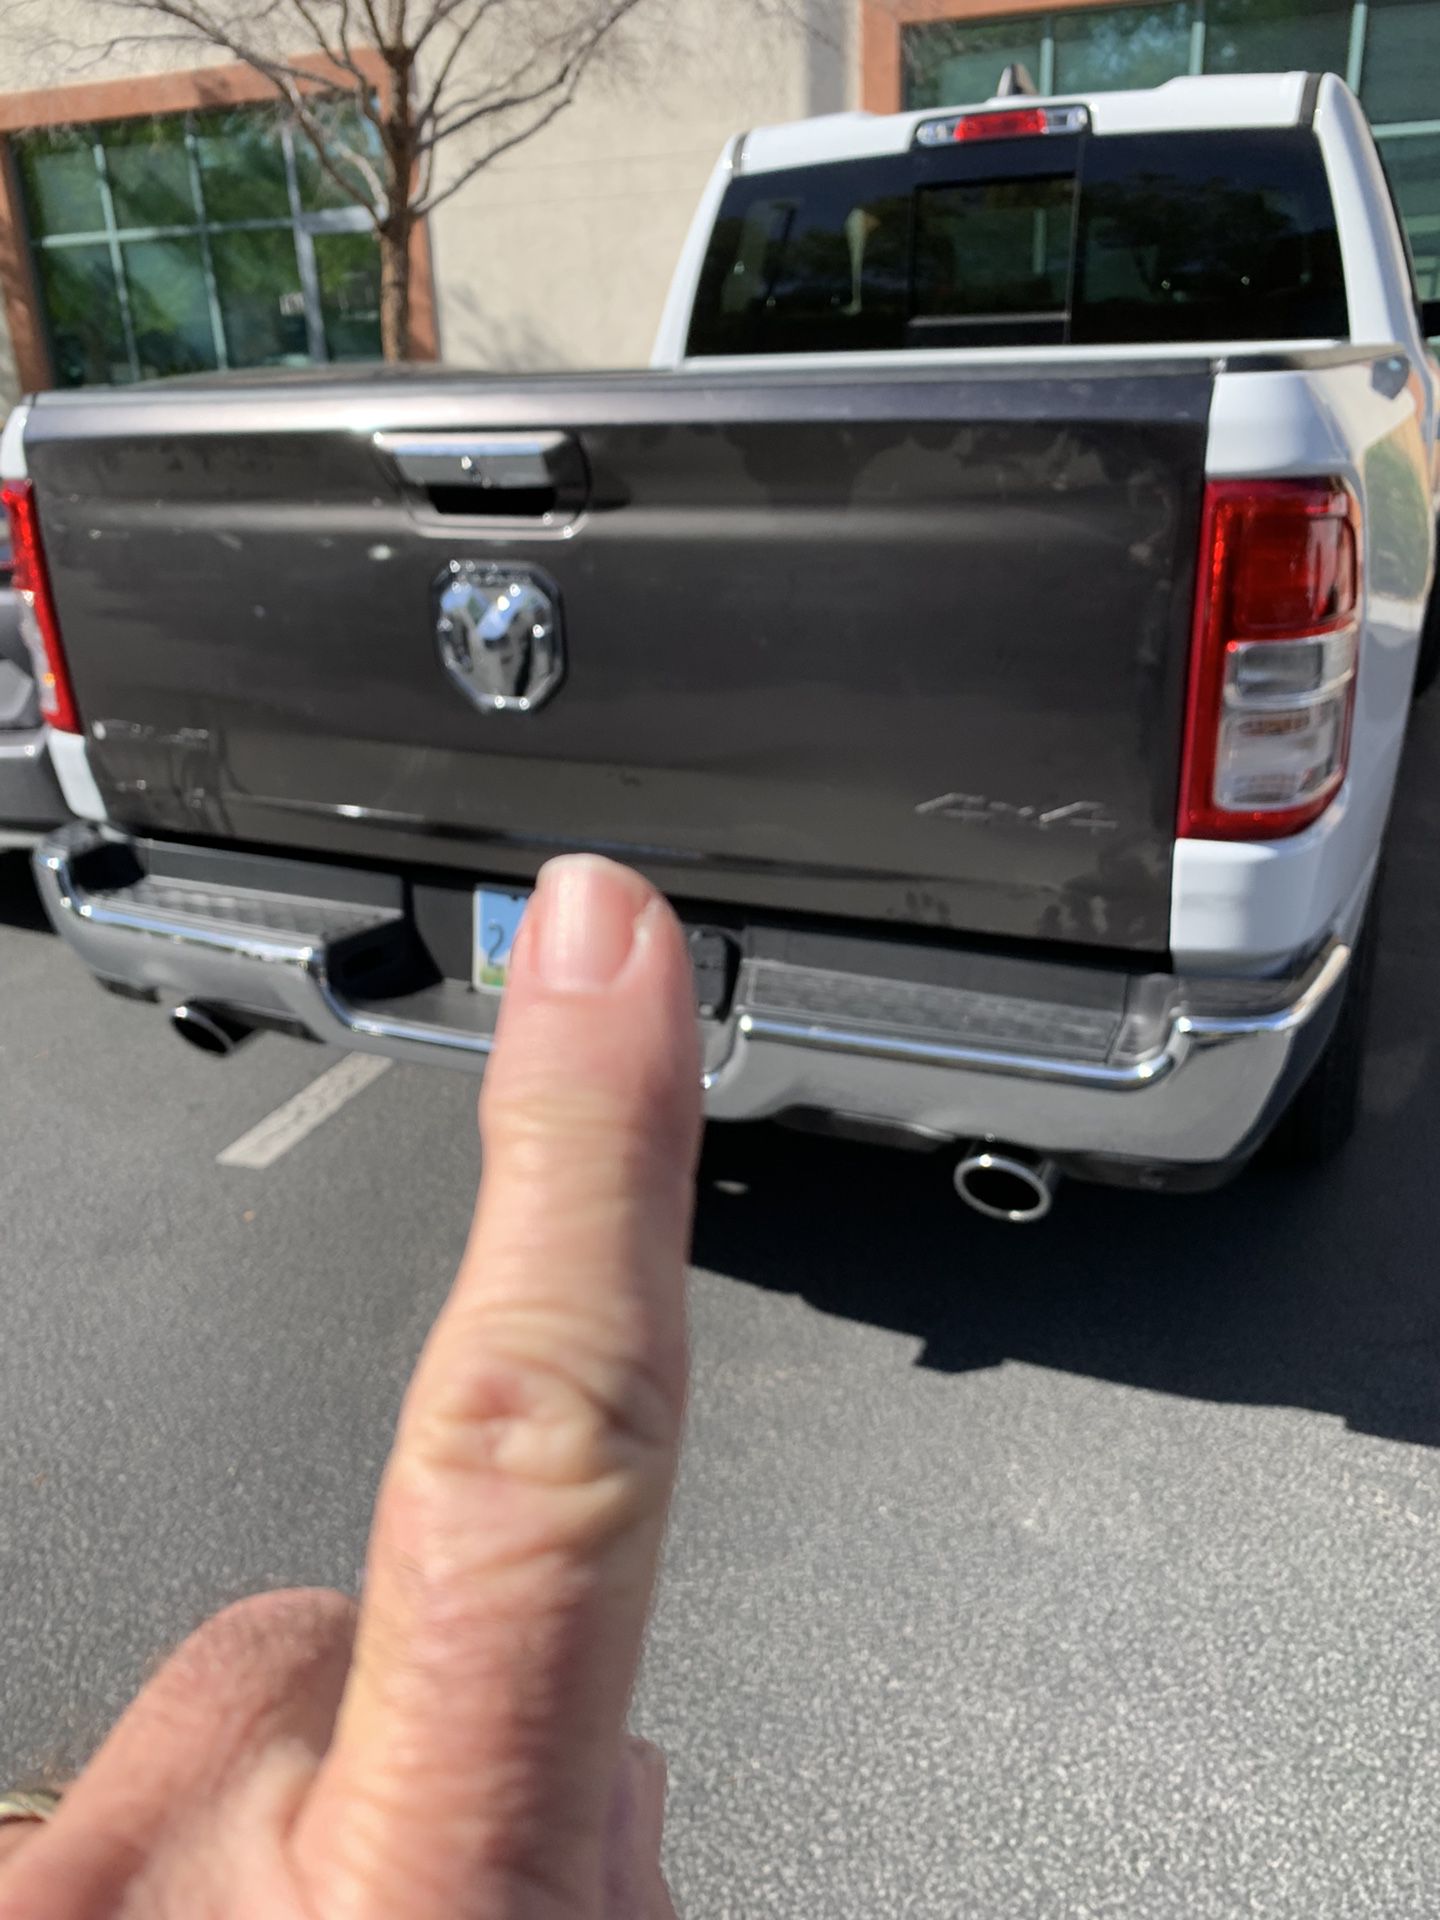 Ram 1500 Tailgate With camera And Lock New Body Style 